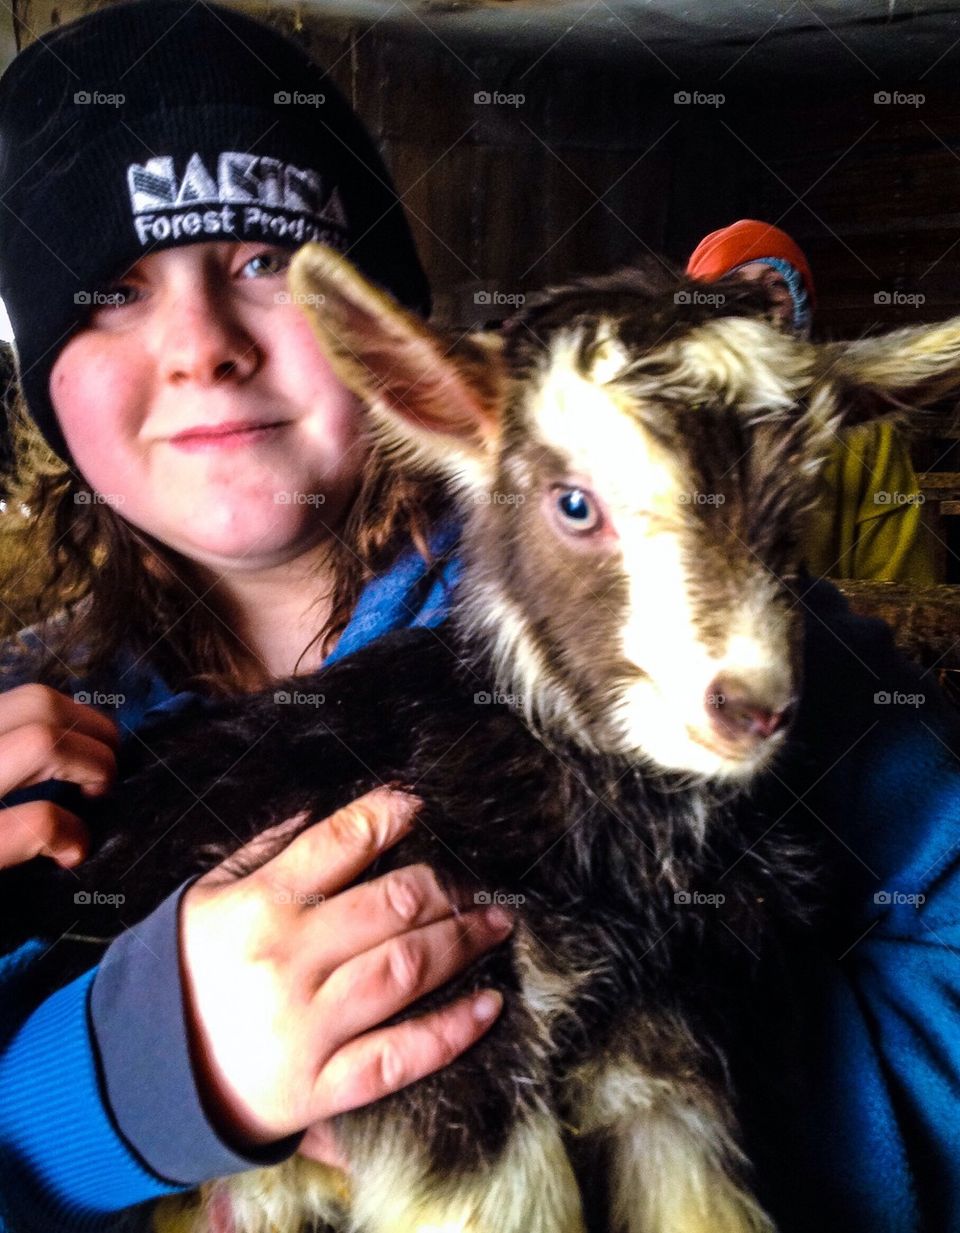 Girl Holding a Baby Goat